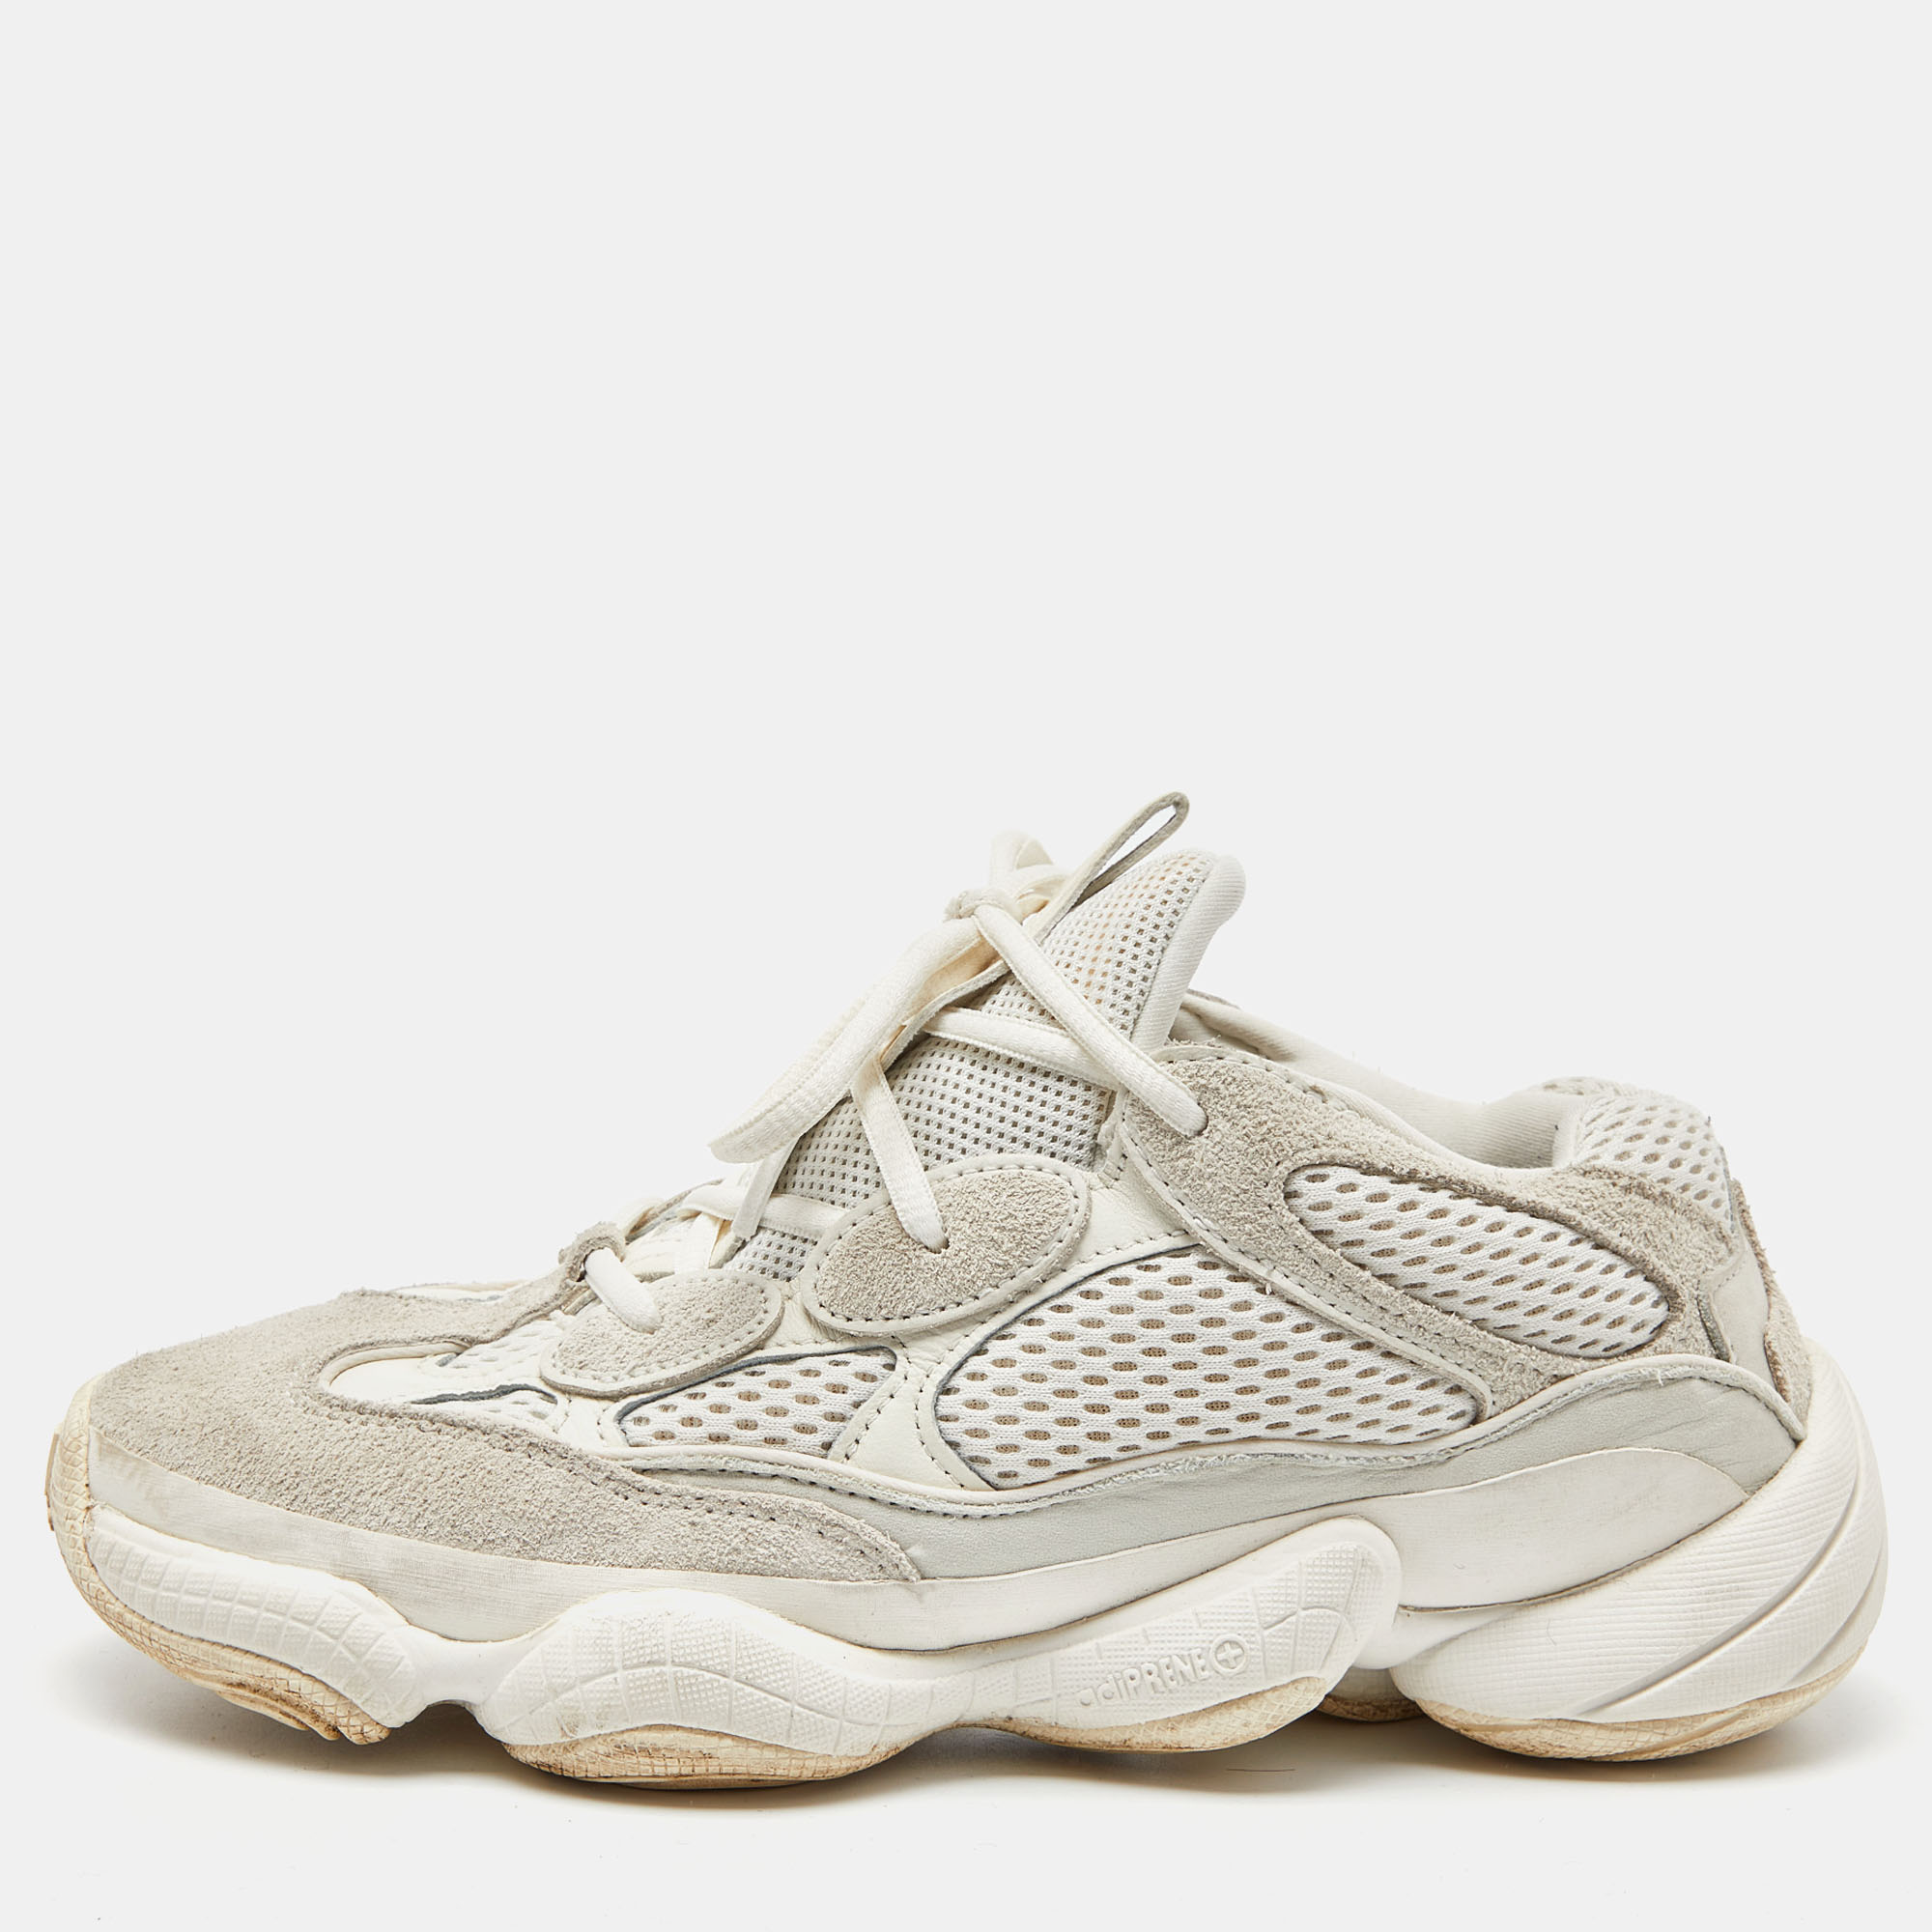 Yeezy X Adidas White Suede And Mesh Yeezy 500 Bone White Sneakers Size 40